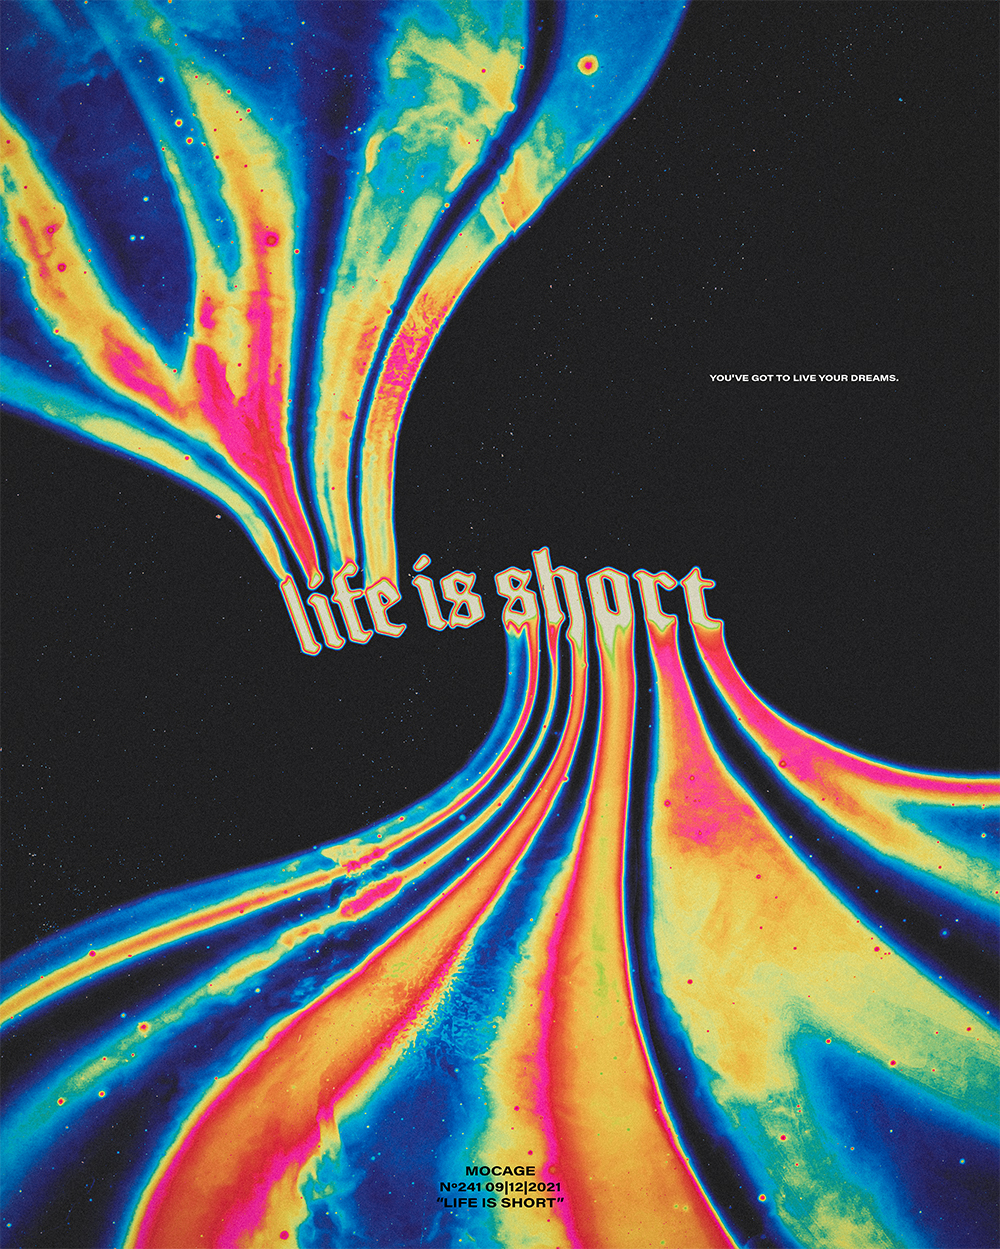 “Life is short”